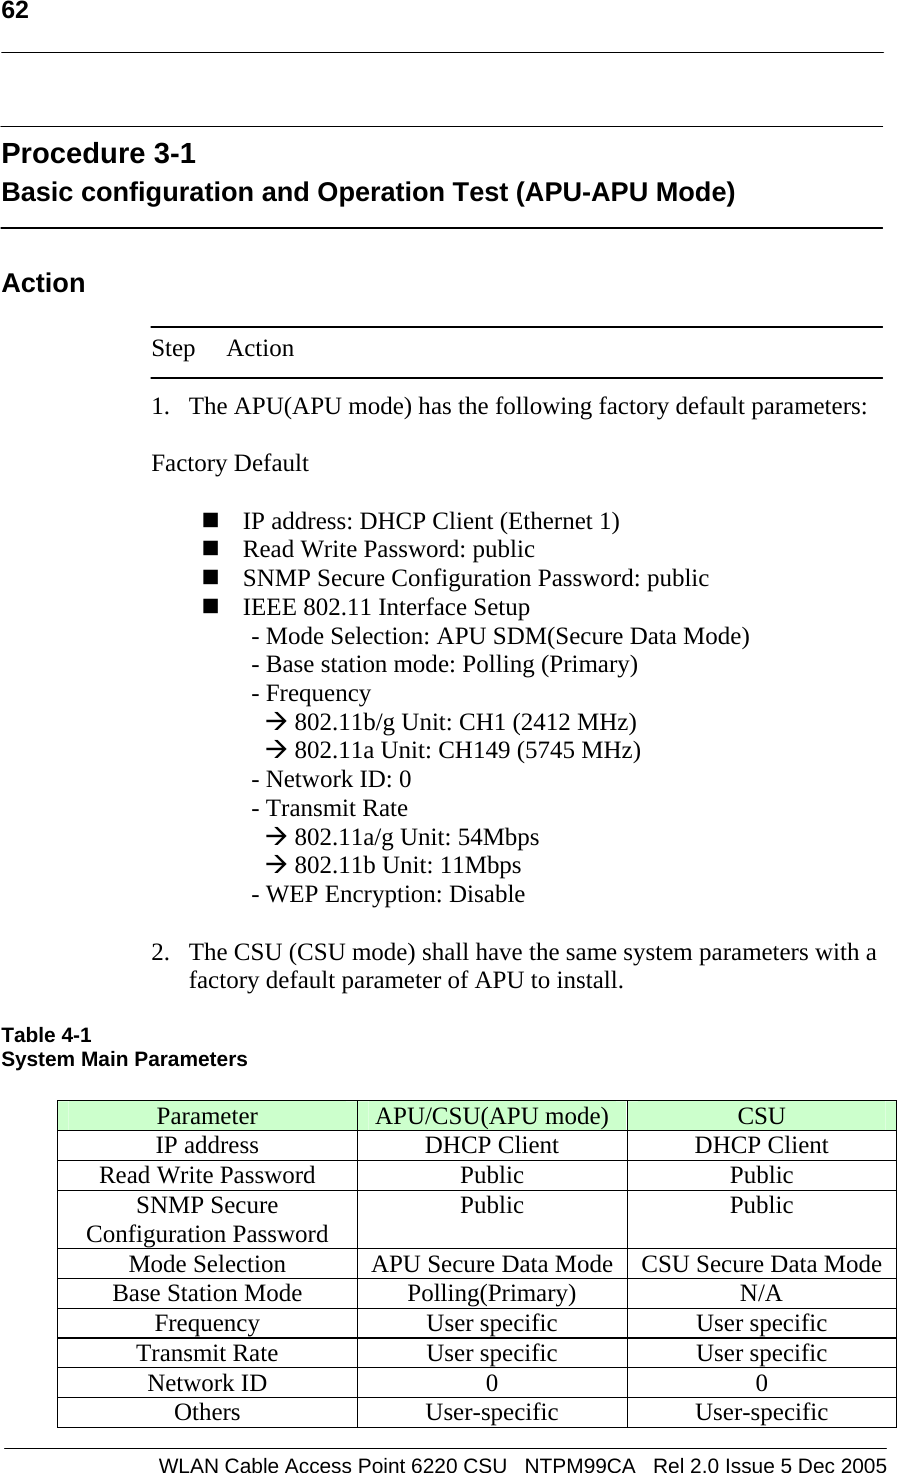   62  WLAN Cable Access Point 6220 CSU   NTPM99CA   Rel 2.0 Issue 5 Dec 2005  Procedure 3-1 Basic configuration and Operation Test (APU-APU Mode)  Action  Step Action  1. The APU(APU mode) has the following factory default parameters:  Factory Default   IP address: DHCP Client (Ethernet 1)  Read Write Password: public  SNMP Secure Configuration Password: public  IEEE 802.11 Interface Setup - Mode Selection: APU SDM(Secure Data Mode)  - Base station mode: Polling (Primary)             - Frequency Æ 802.11b/g Unit: CH1 (2412 MHz)  Æ 802.11a Unit: CH149 (5745 MHz)              - Network ID: 0 - Transmit Rate Æ 802.11a/g Unit: 54Mbps Æ 802.11b Unit: 11Mbps - WEP Encryption: Disable  2. The CSU (CSU mode) shall have the same system parameters with a factory default parameter of APU to install.   Table 4-1 System Main Parameters  Parameter  APU/CSU(APU mode) CSU IP address  DHCP Client  DHCP Client Read Write Password  Public  Public SNMP Secure Configuration Password  Public Public Mode Selection  APU Secure Data Mode CSU Secure Data ModeBase Station Mode  Polling(Primary)  N/A Frequency  User specific  User specific Transmit Rate  User specific  User specific Network ID  0  0 Others User-specific User-specific 